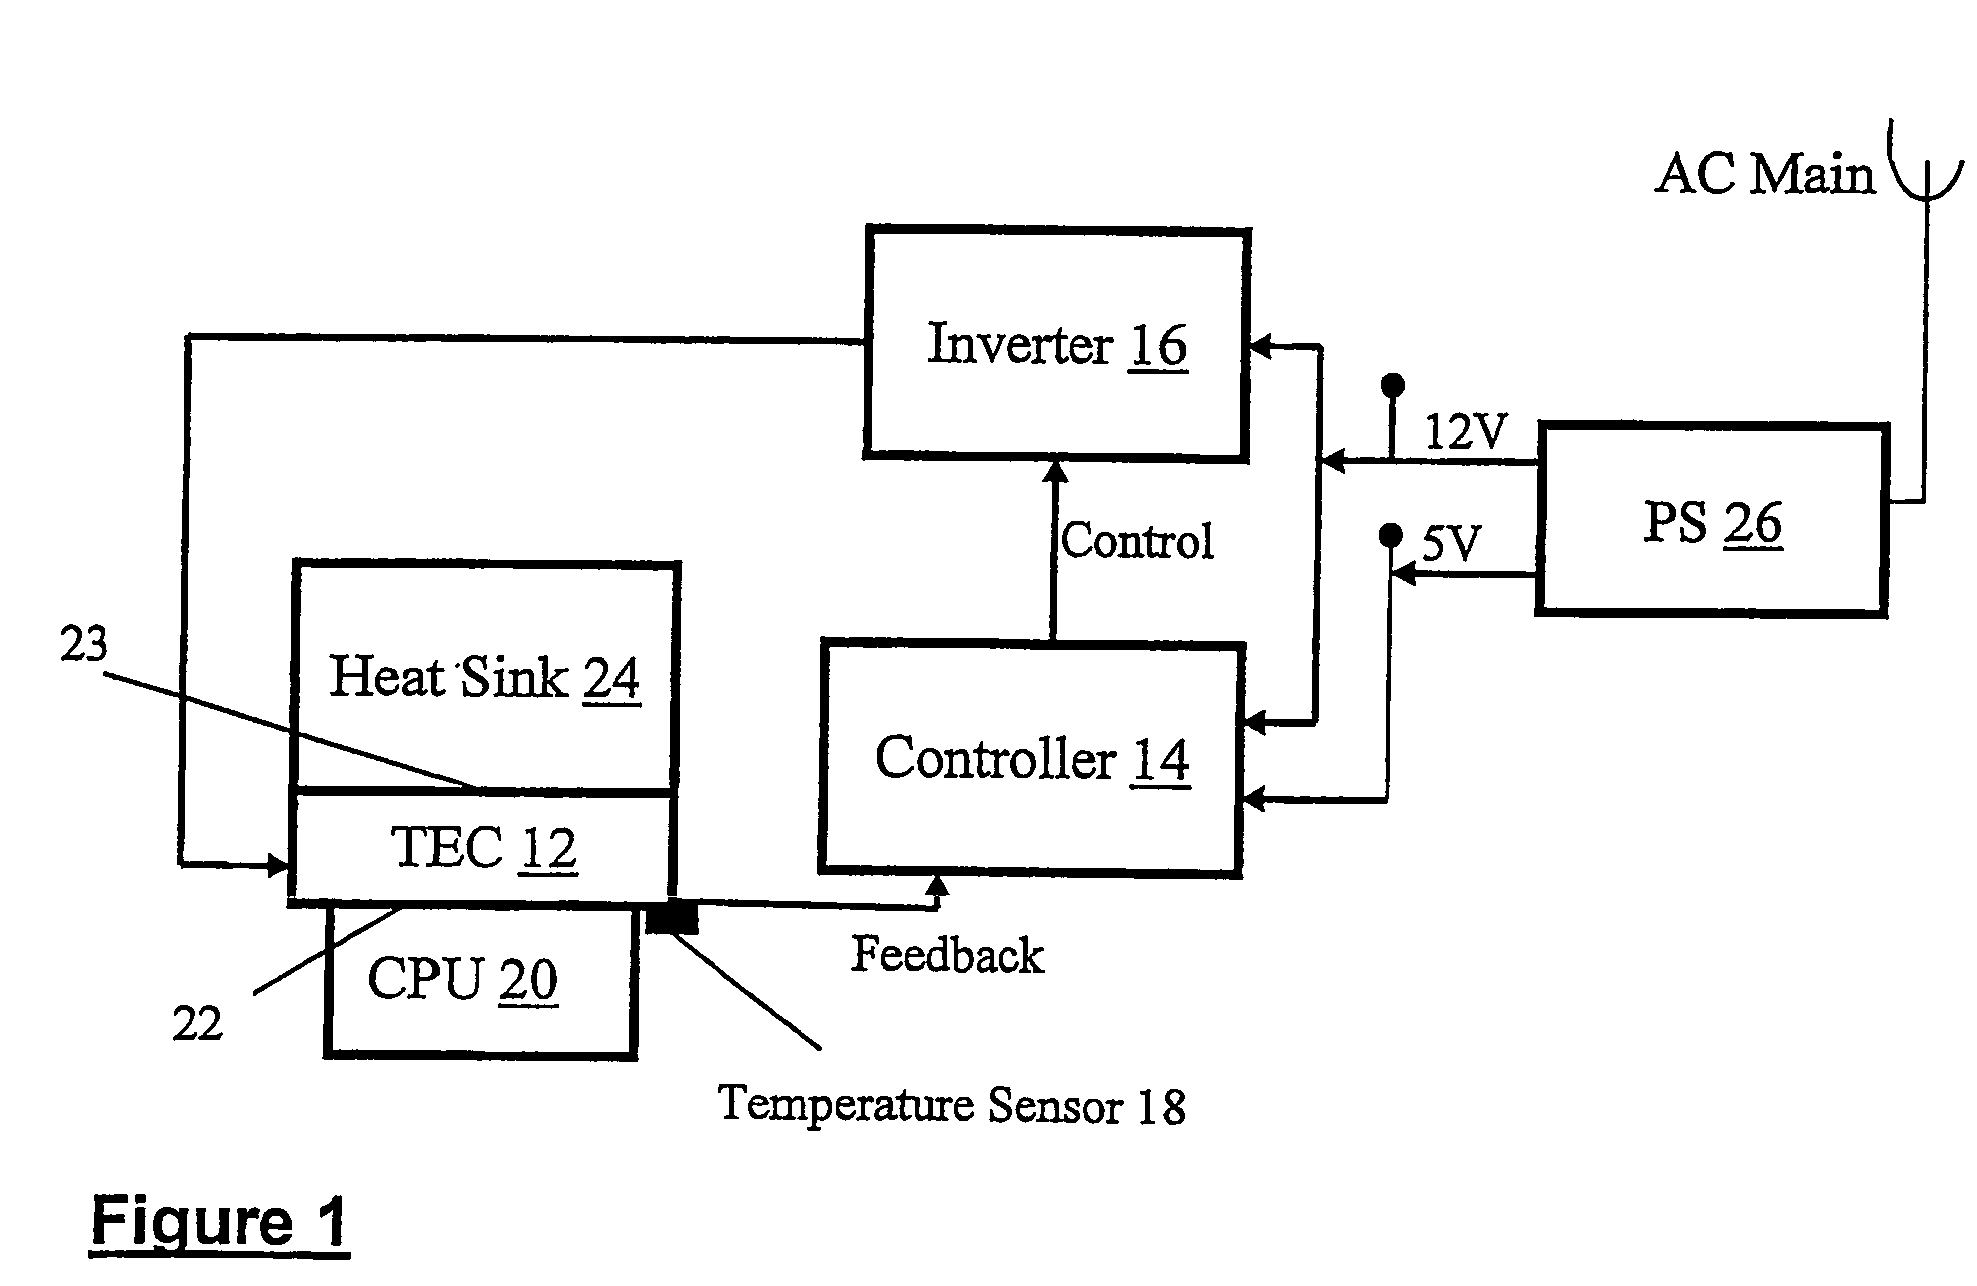 Active cooling system for CPU